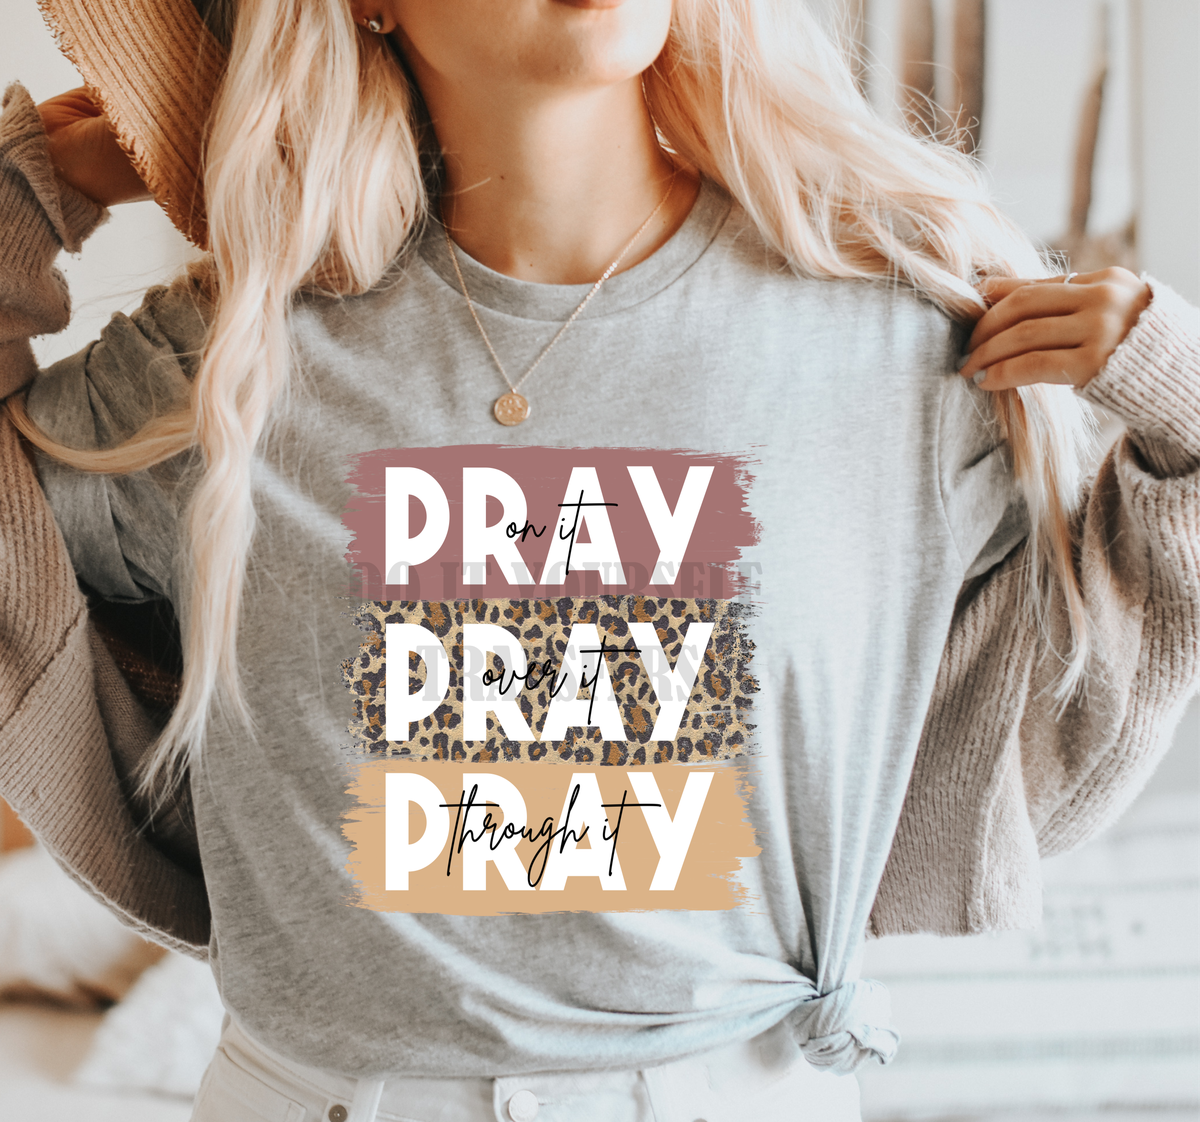 Pray on it Pray over it Pray through it  Adult size 9.5x12 DTF TRANSFERPRINT TO ORDER